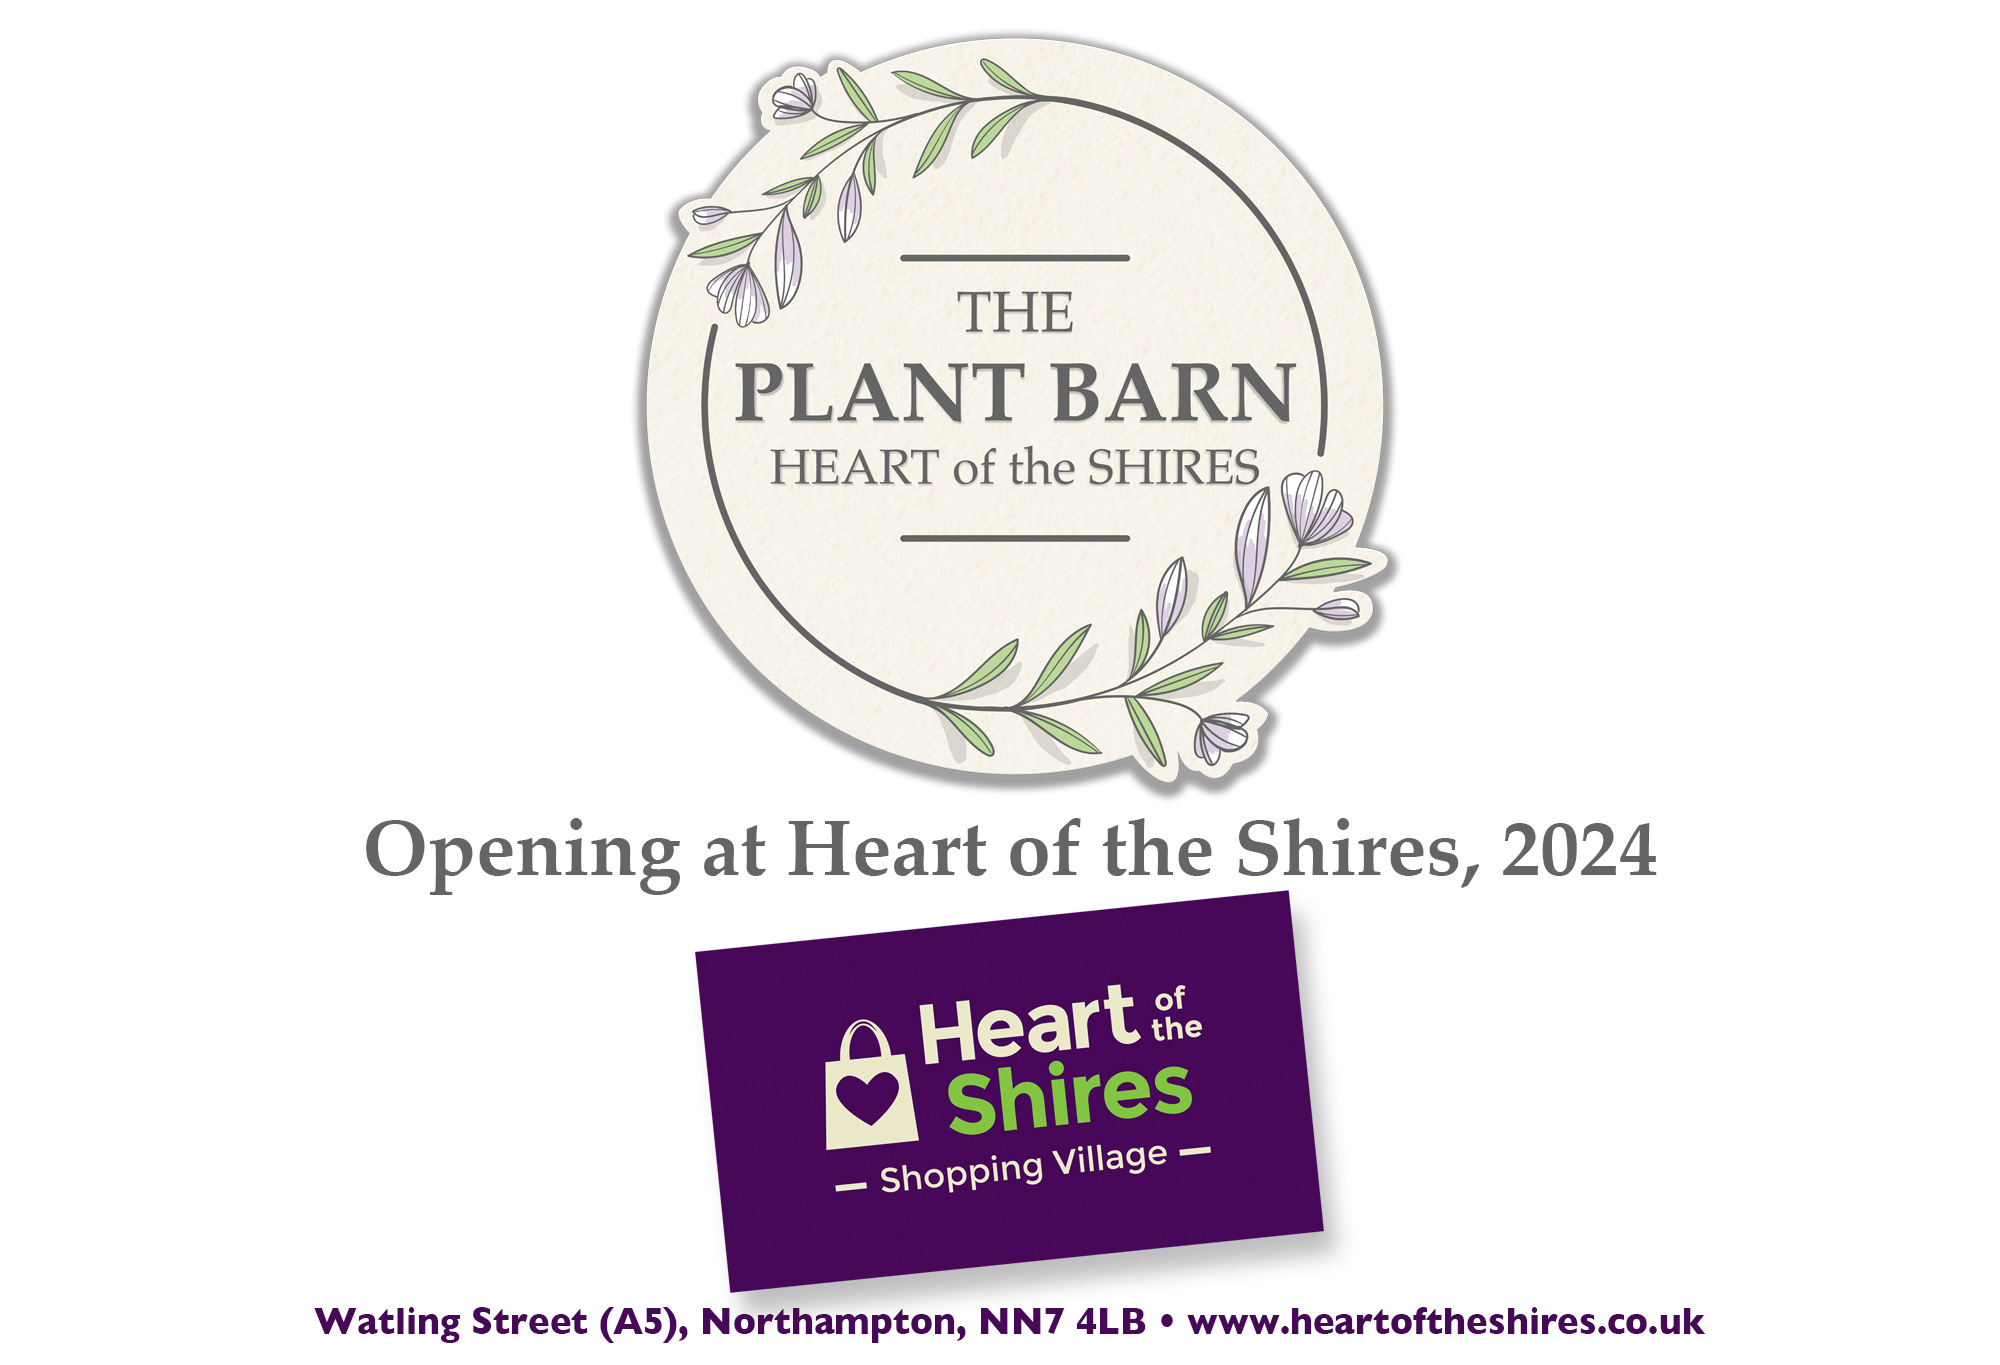 The Plant Barn at Heart of the Shires